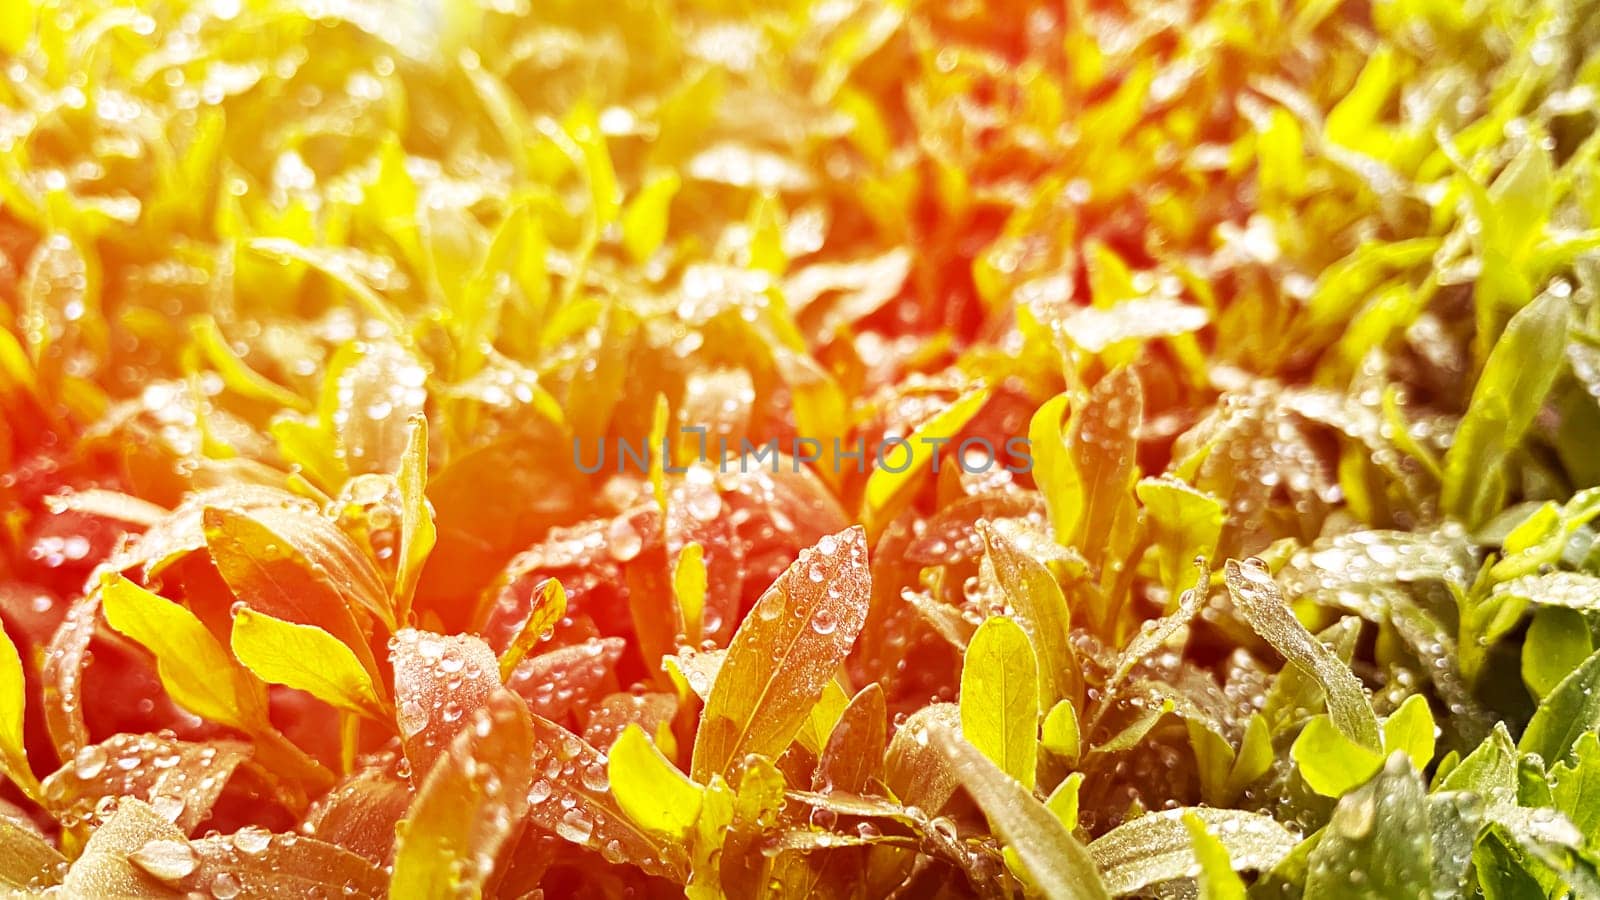 grass close-up at dawn with dew drops by KCreeper